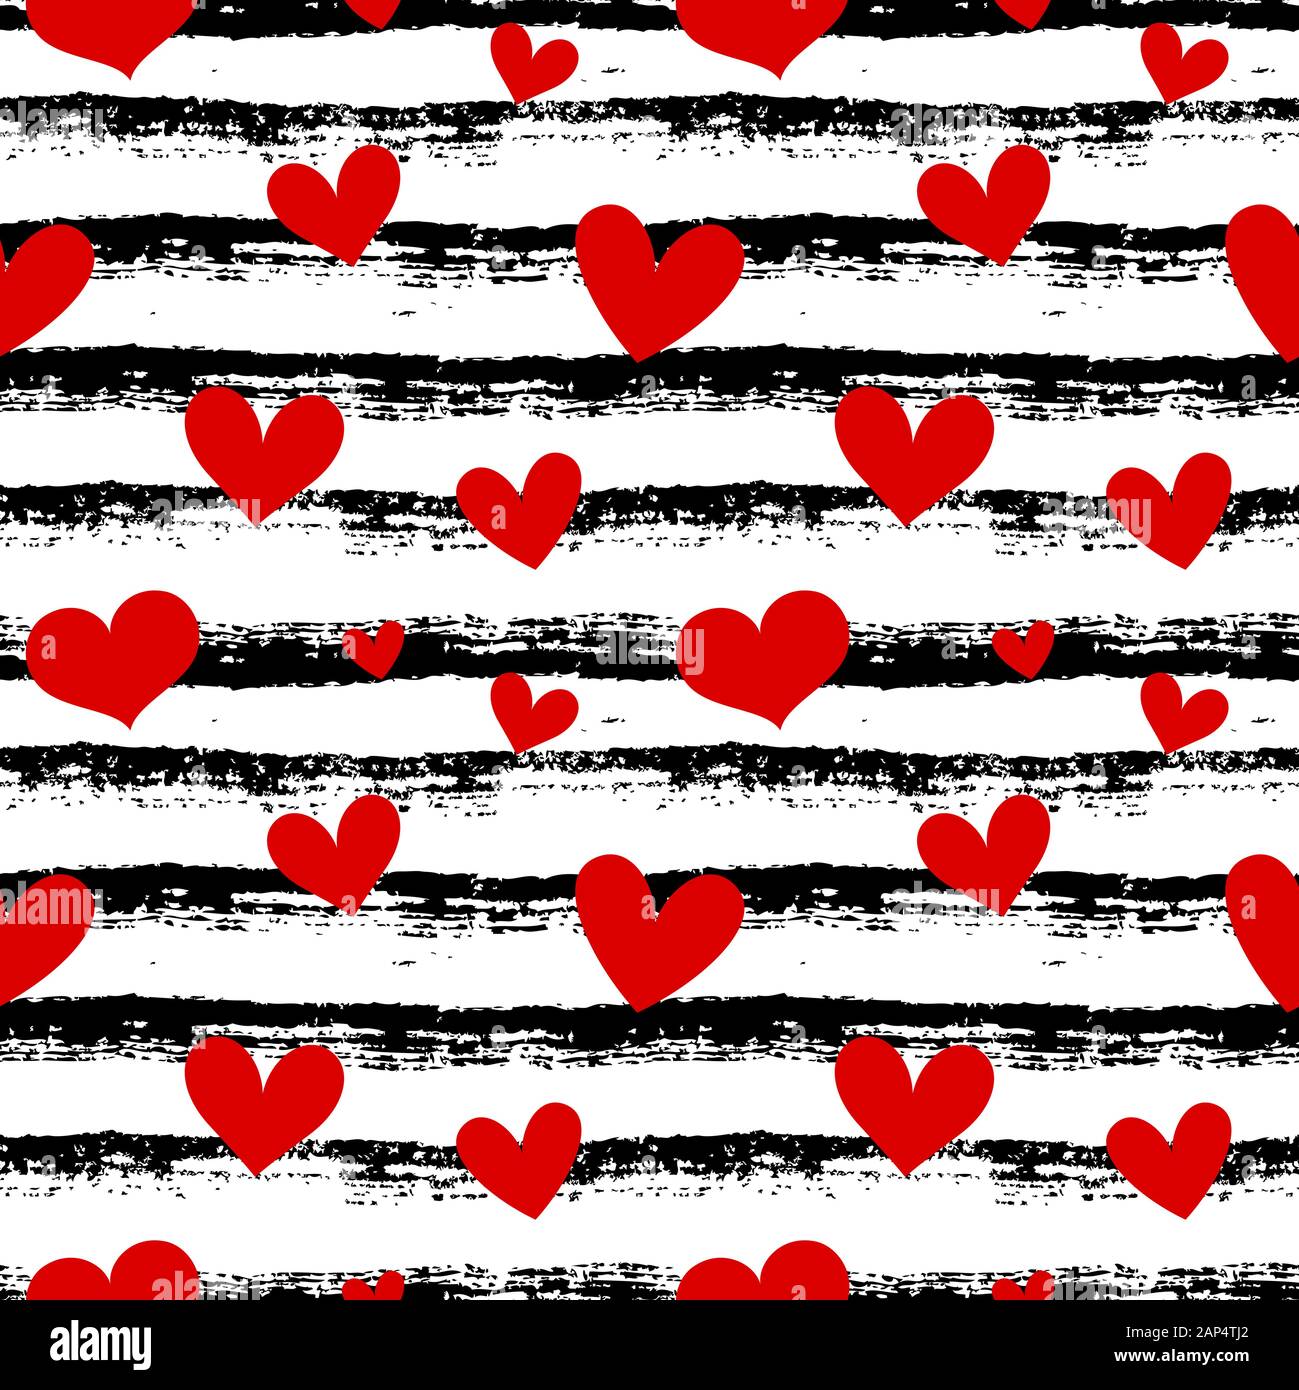 Seamless pattern with hearts and hand drawn stripes. Black and white striped background and red hearts. Modern bright print for love, wedding, Valenti Stock Vector